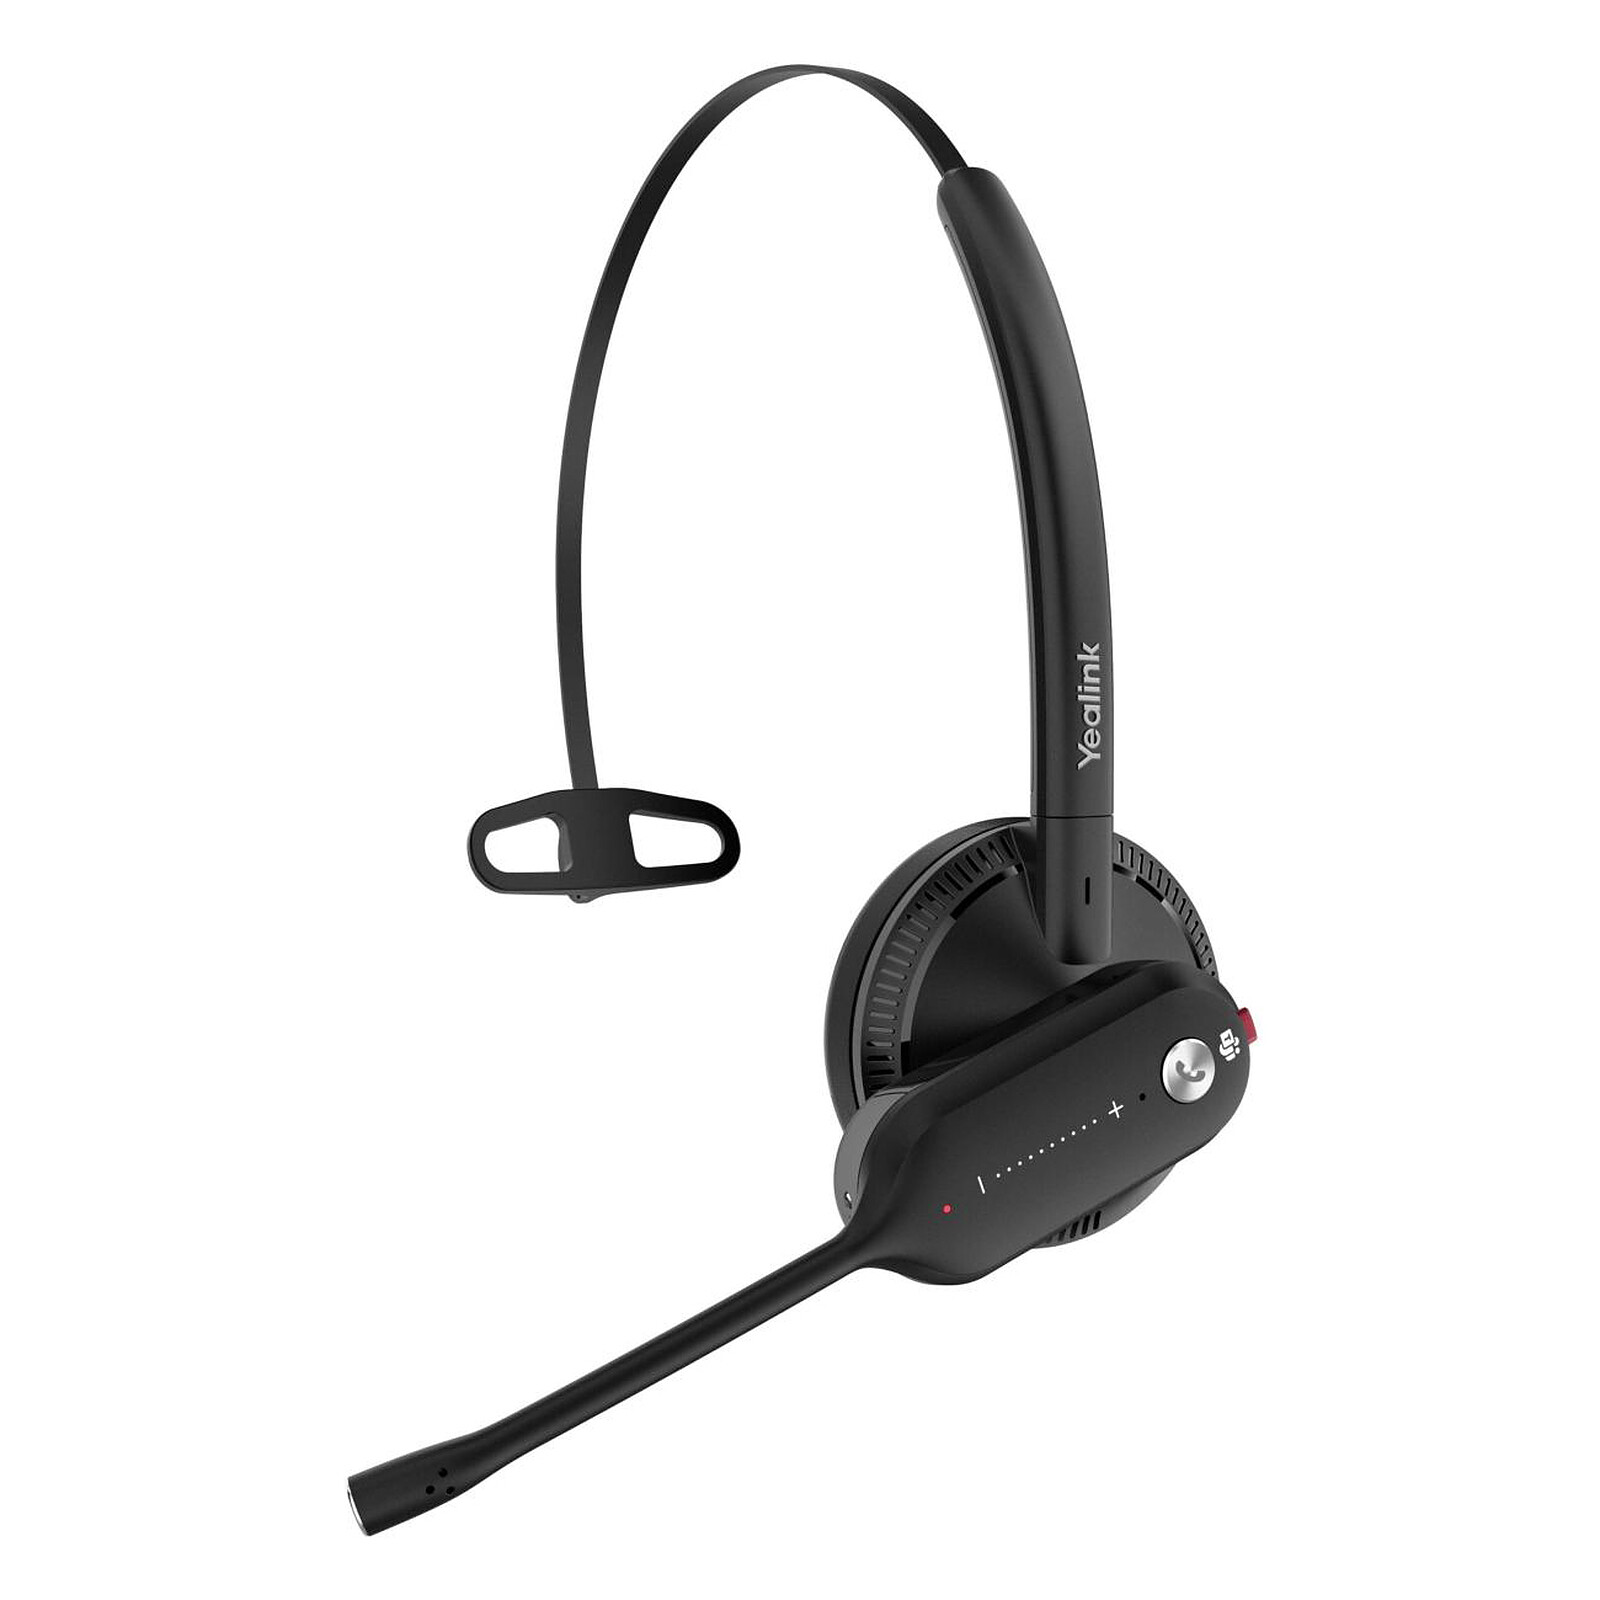 Yealink WH63 Teams - Headset - LDLC 3-year warranty